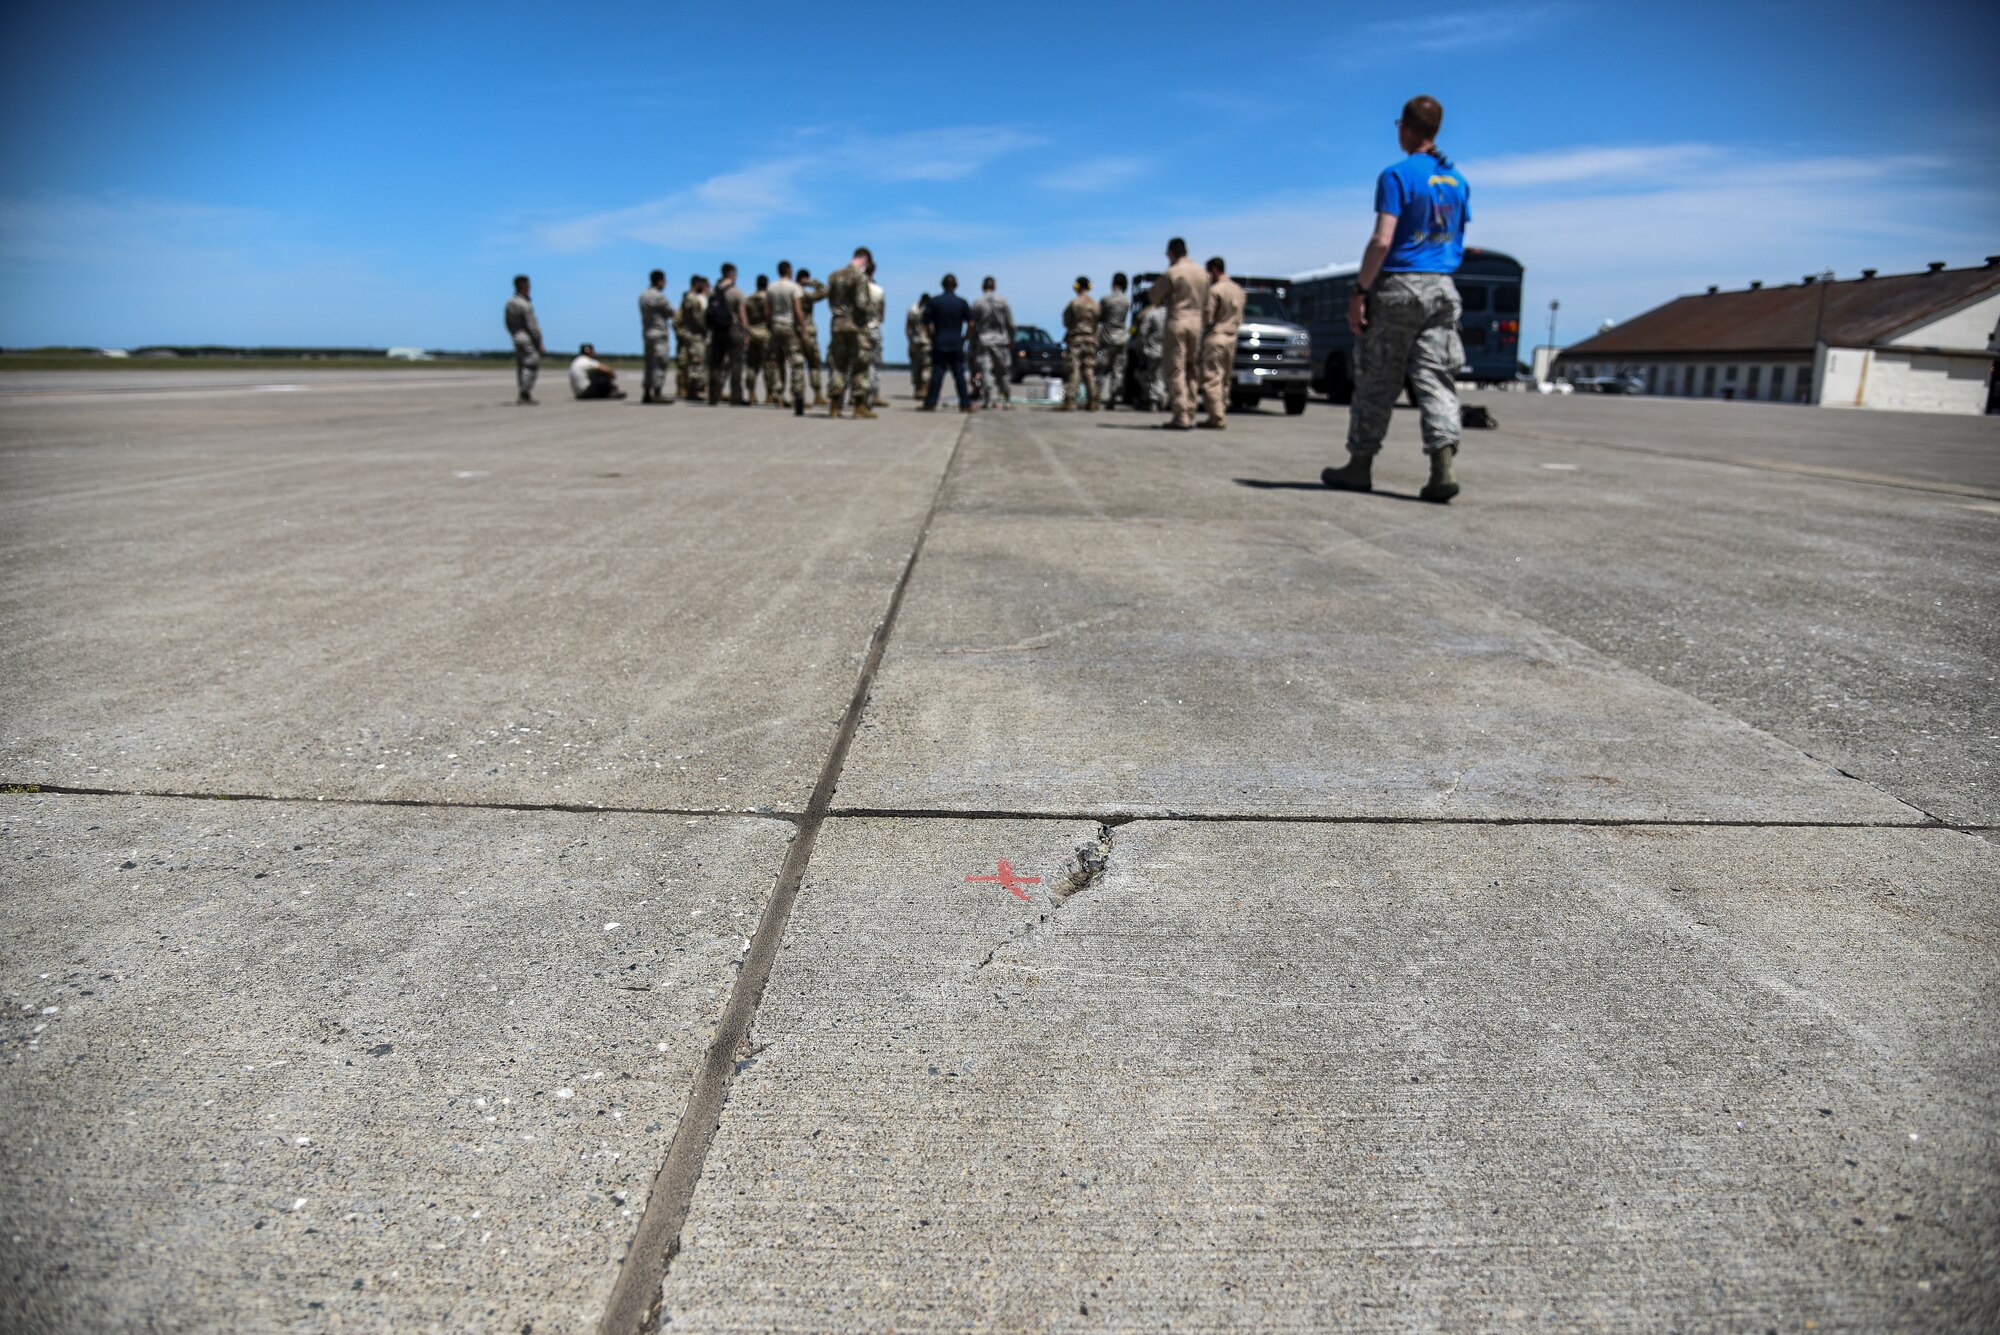 Twenty-four Airmen from nine different squadrons participated in a Multi-Capable Airmen event in support of the Agile Combat Employment concept at Misawa Air Base, Japan, June 12, 2020. The MCAs completed airfield inspections and four expedient spall repairs on the flightline.